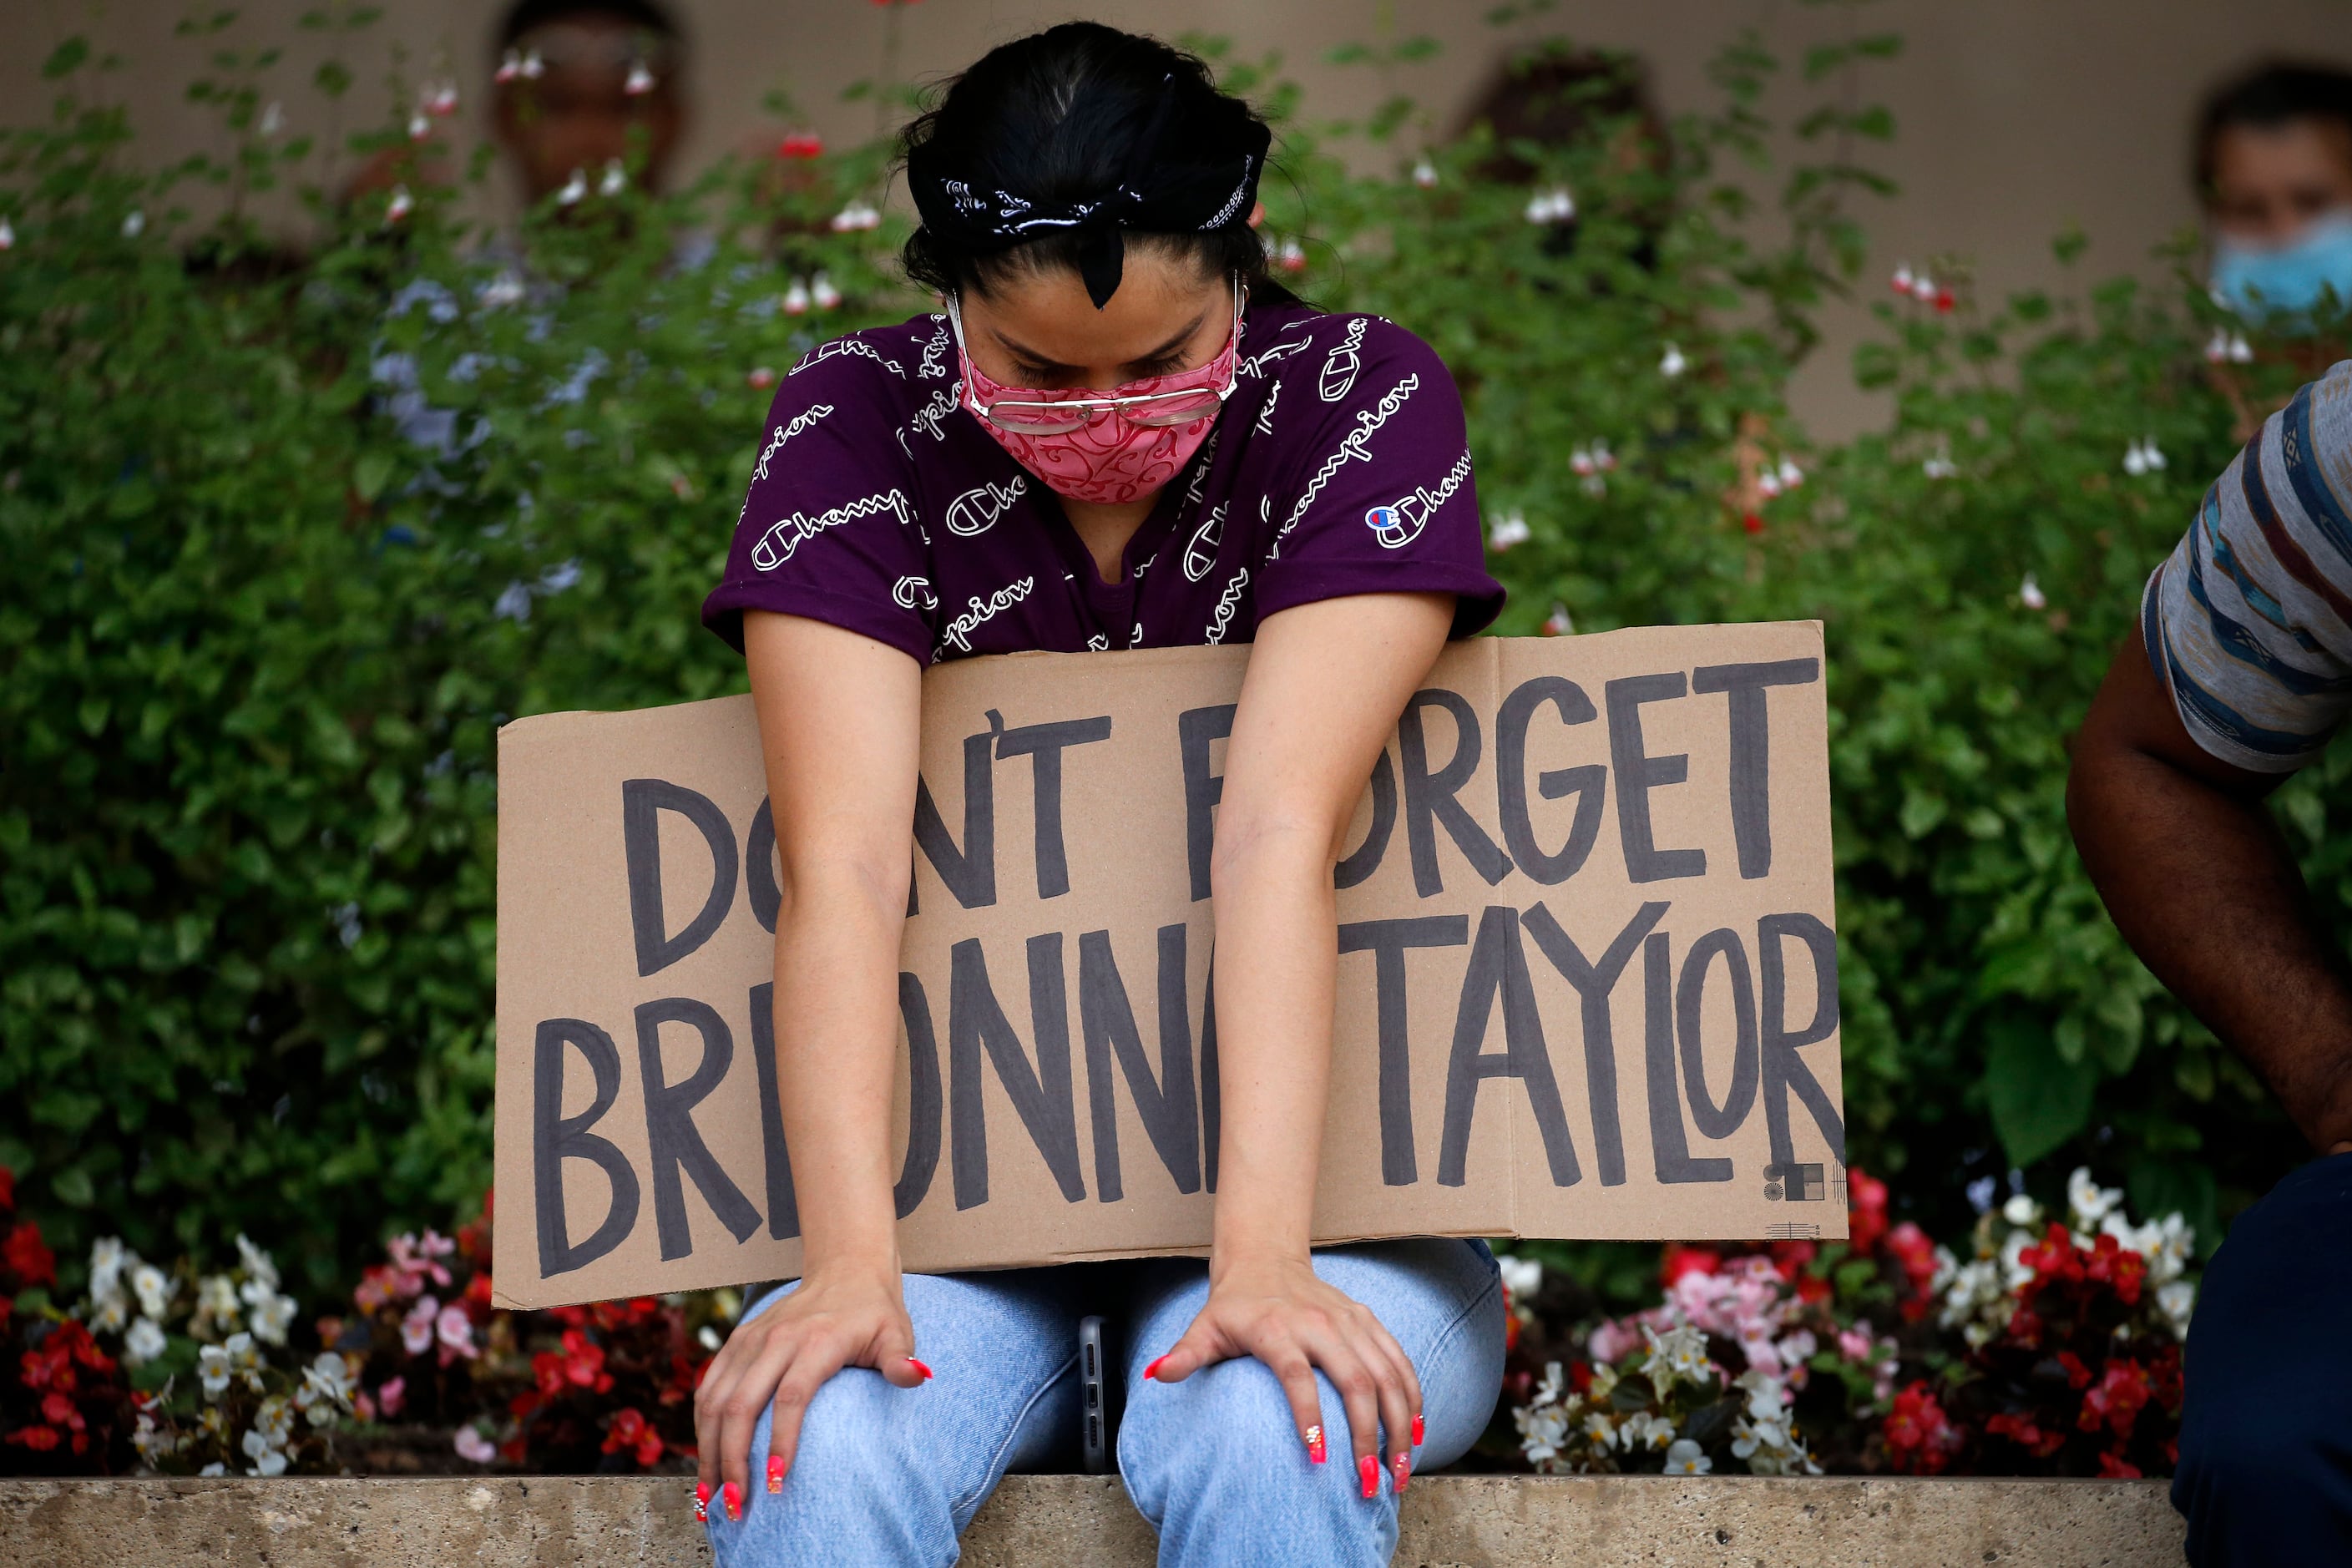 A protestor supporting Breonna Taylor came to listen to a Black Lives Matters rally at...